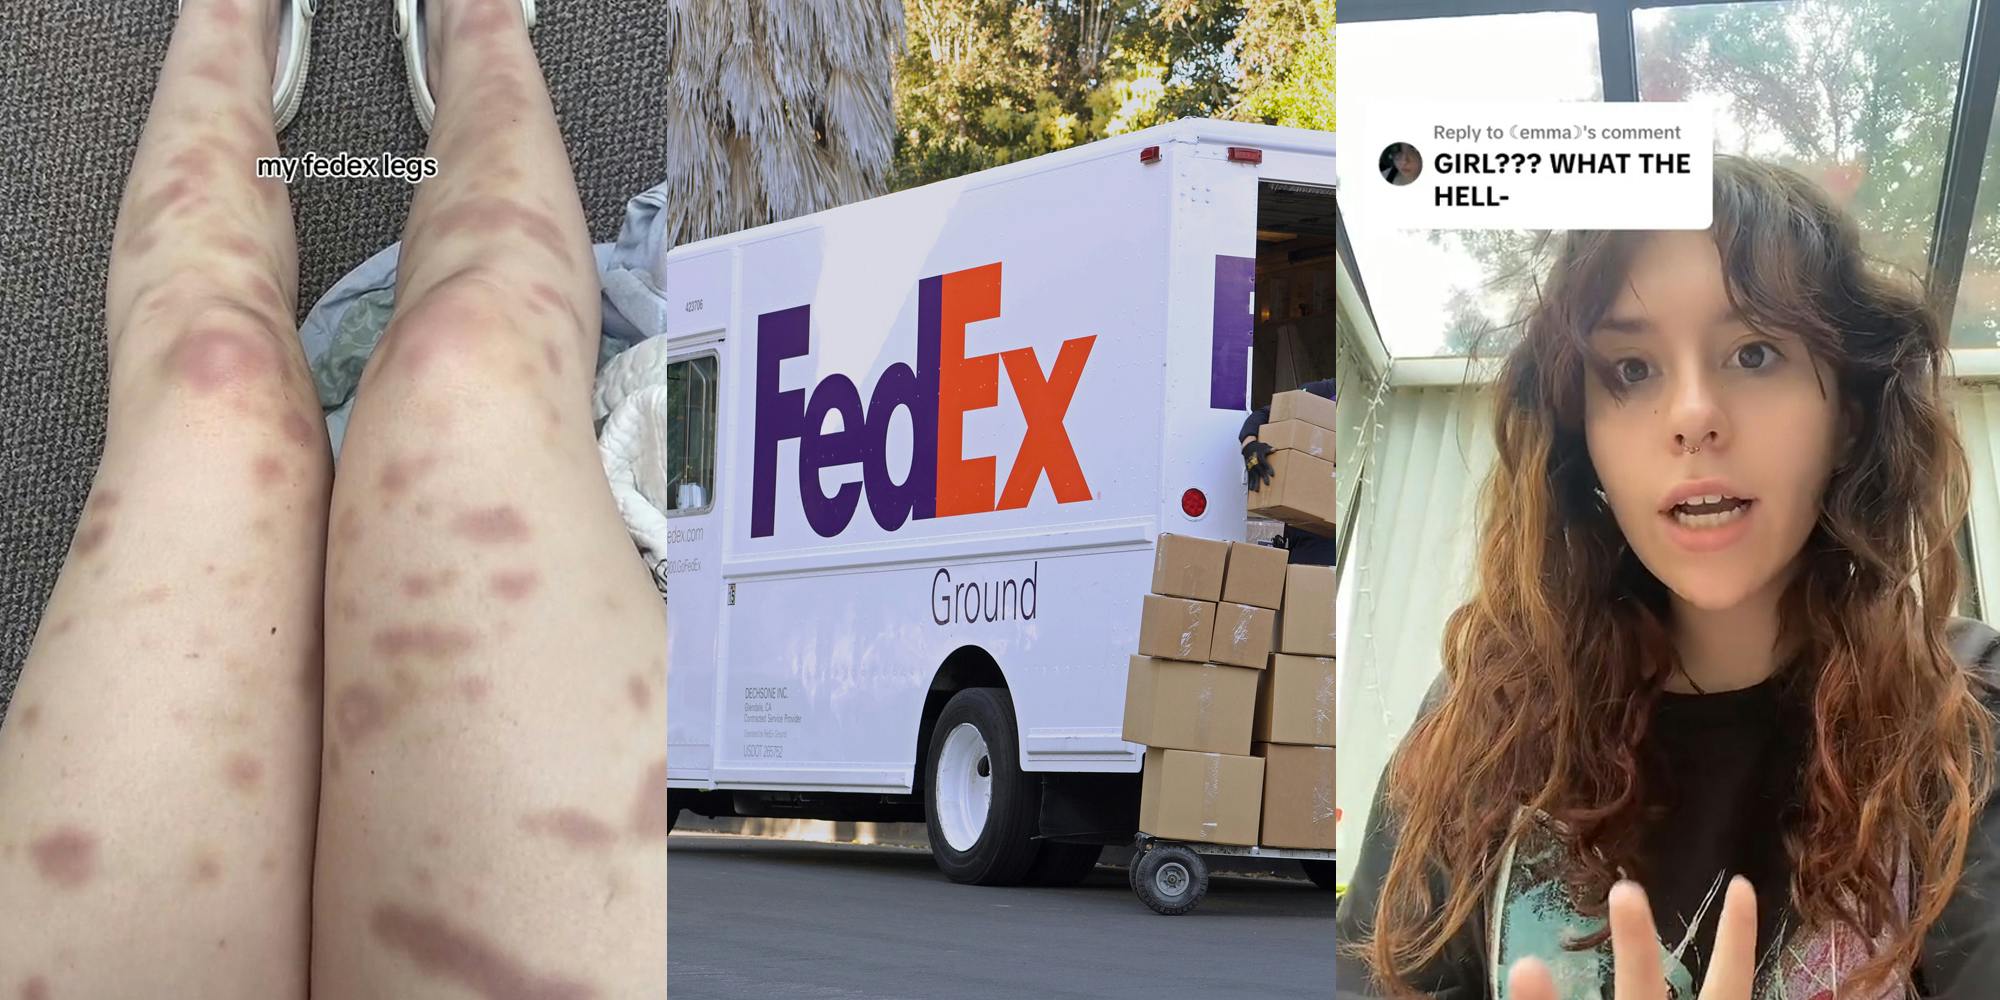 FedEx driver's legs covered in bruises with caption "my fedex legs" (l) FedEx worker onloading boxes from FedEx truck (c) FedEx driver speaking with caption "GIRL??? WHAT THE HELL-" (r)